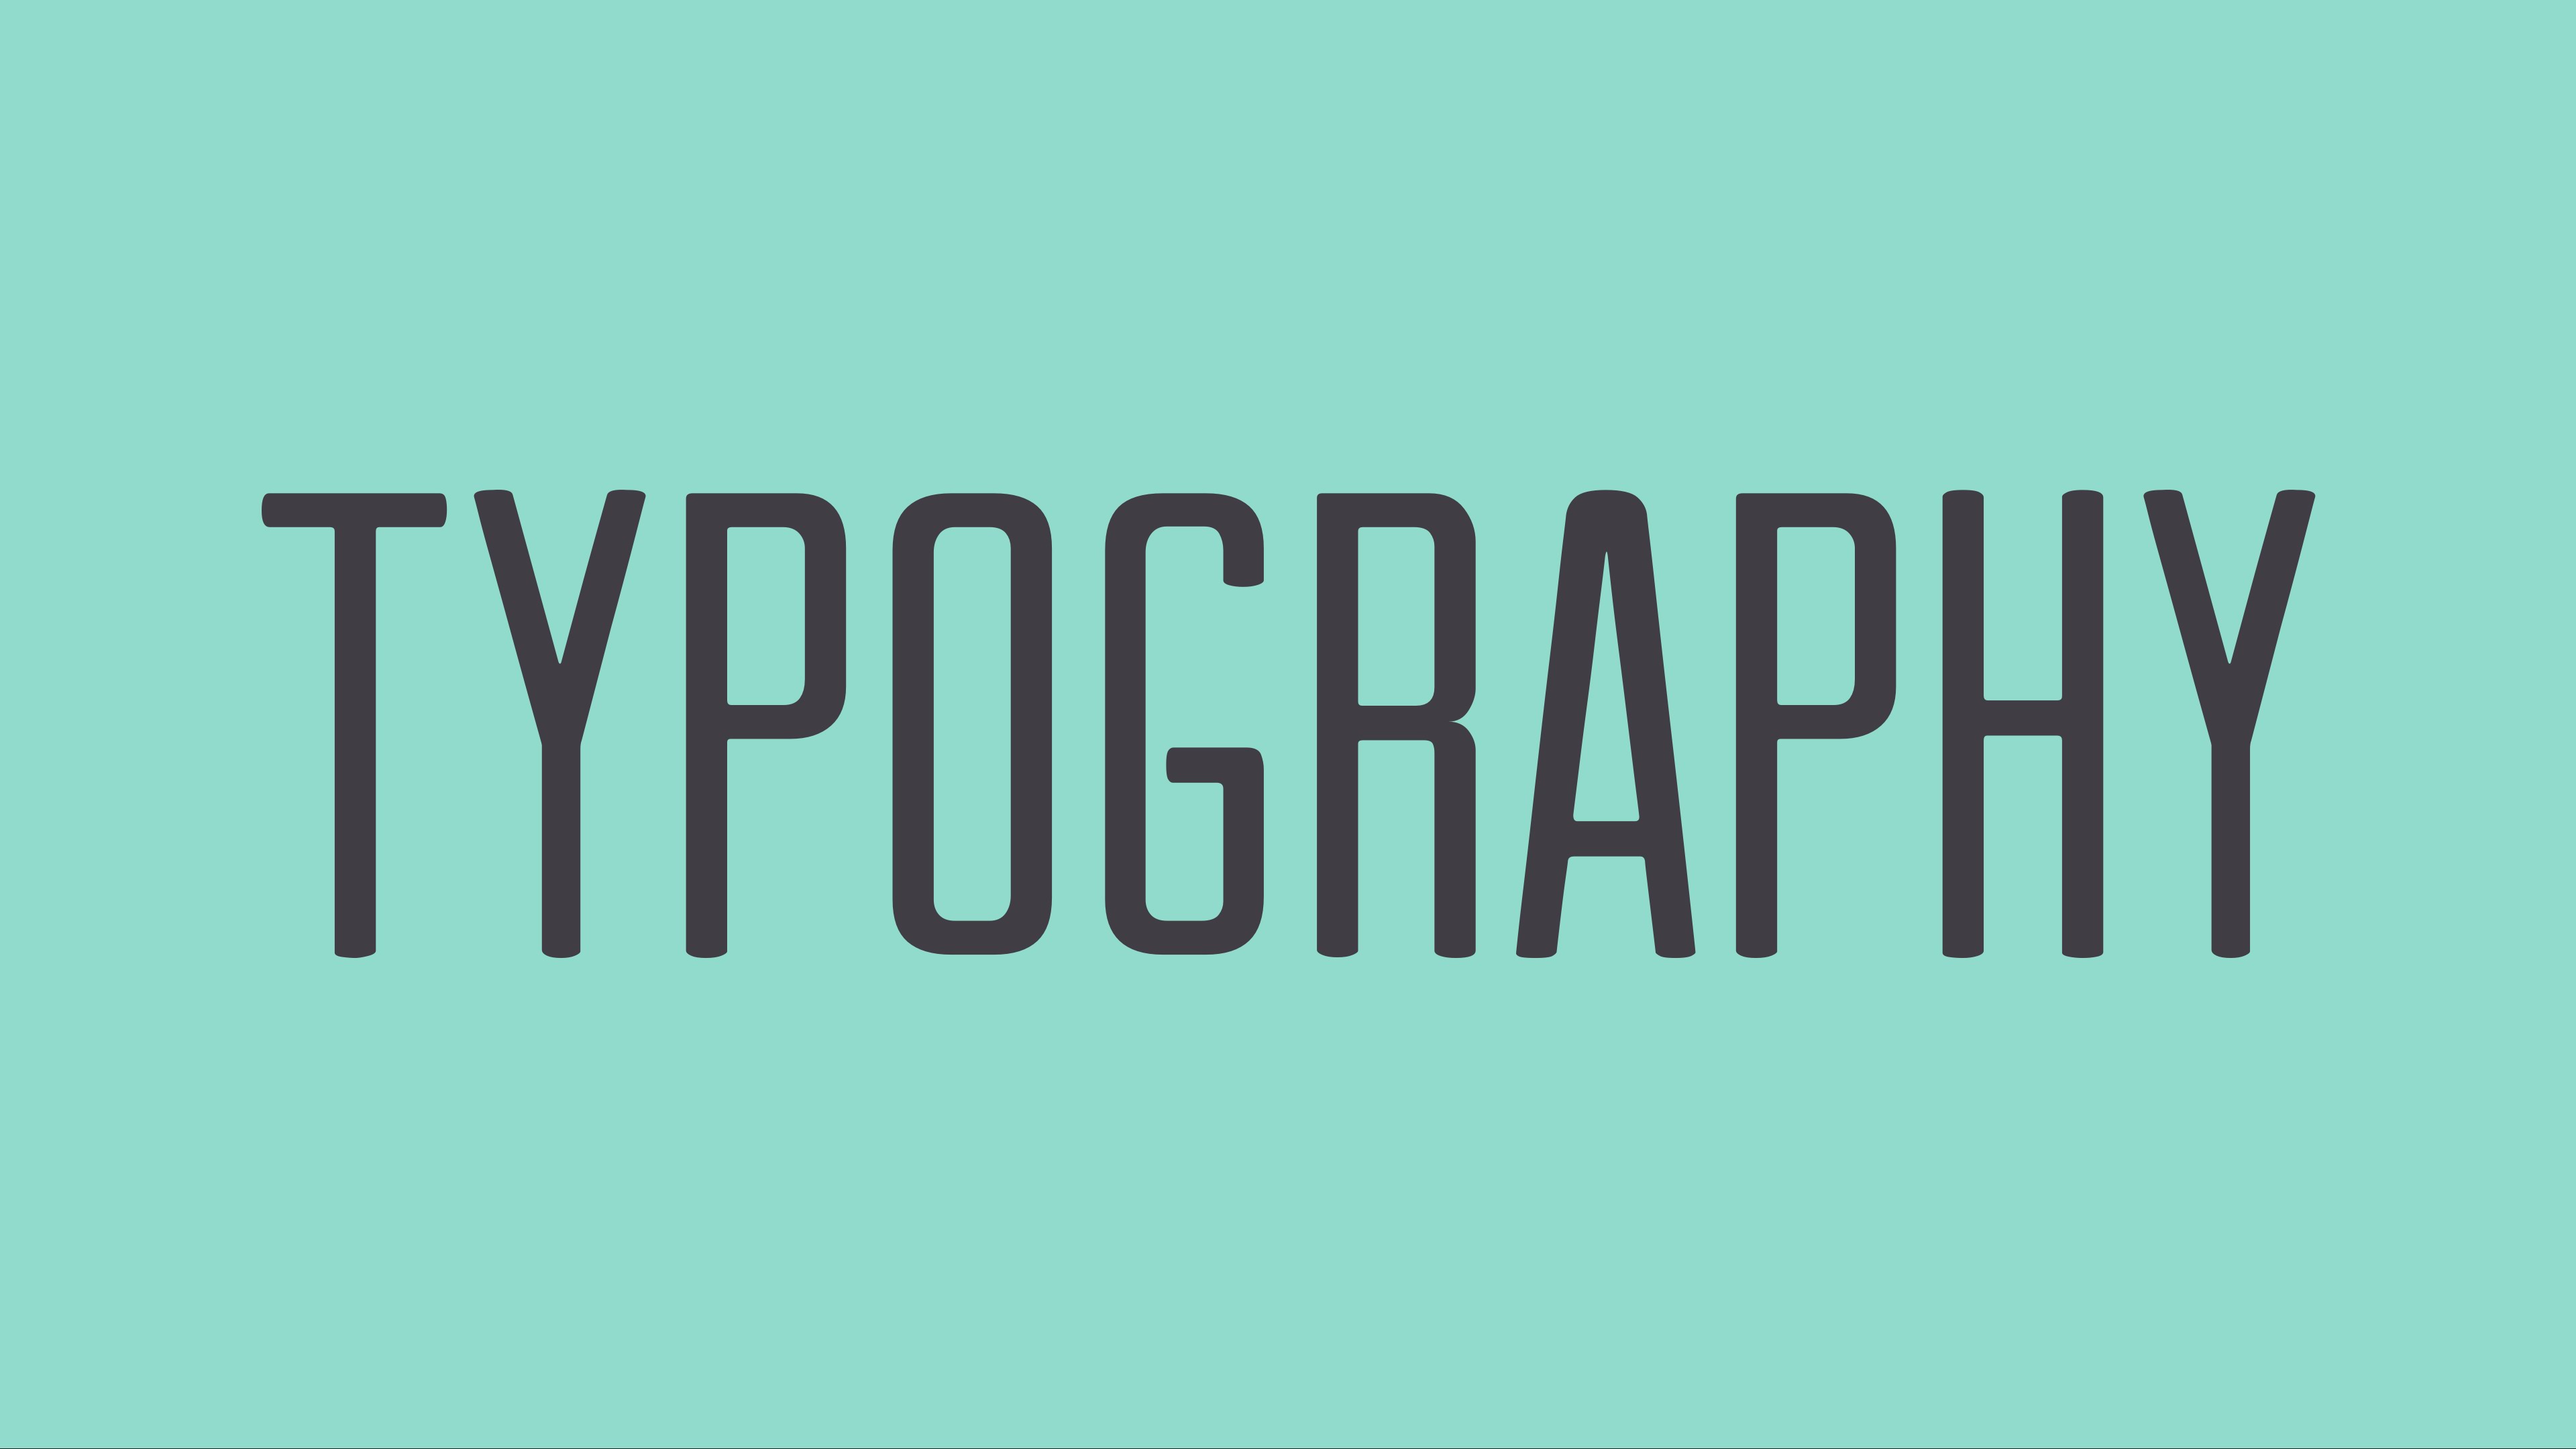 All that typography does for your website